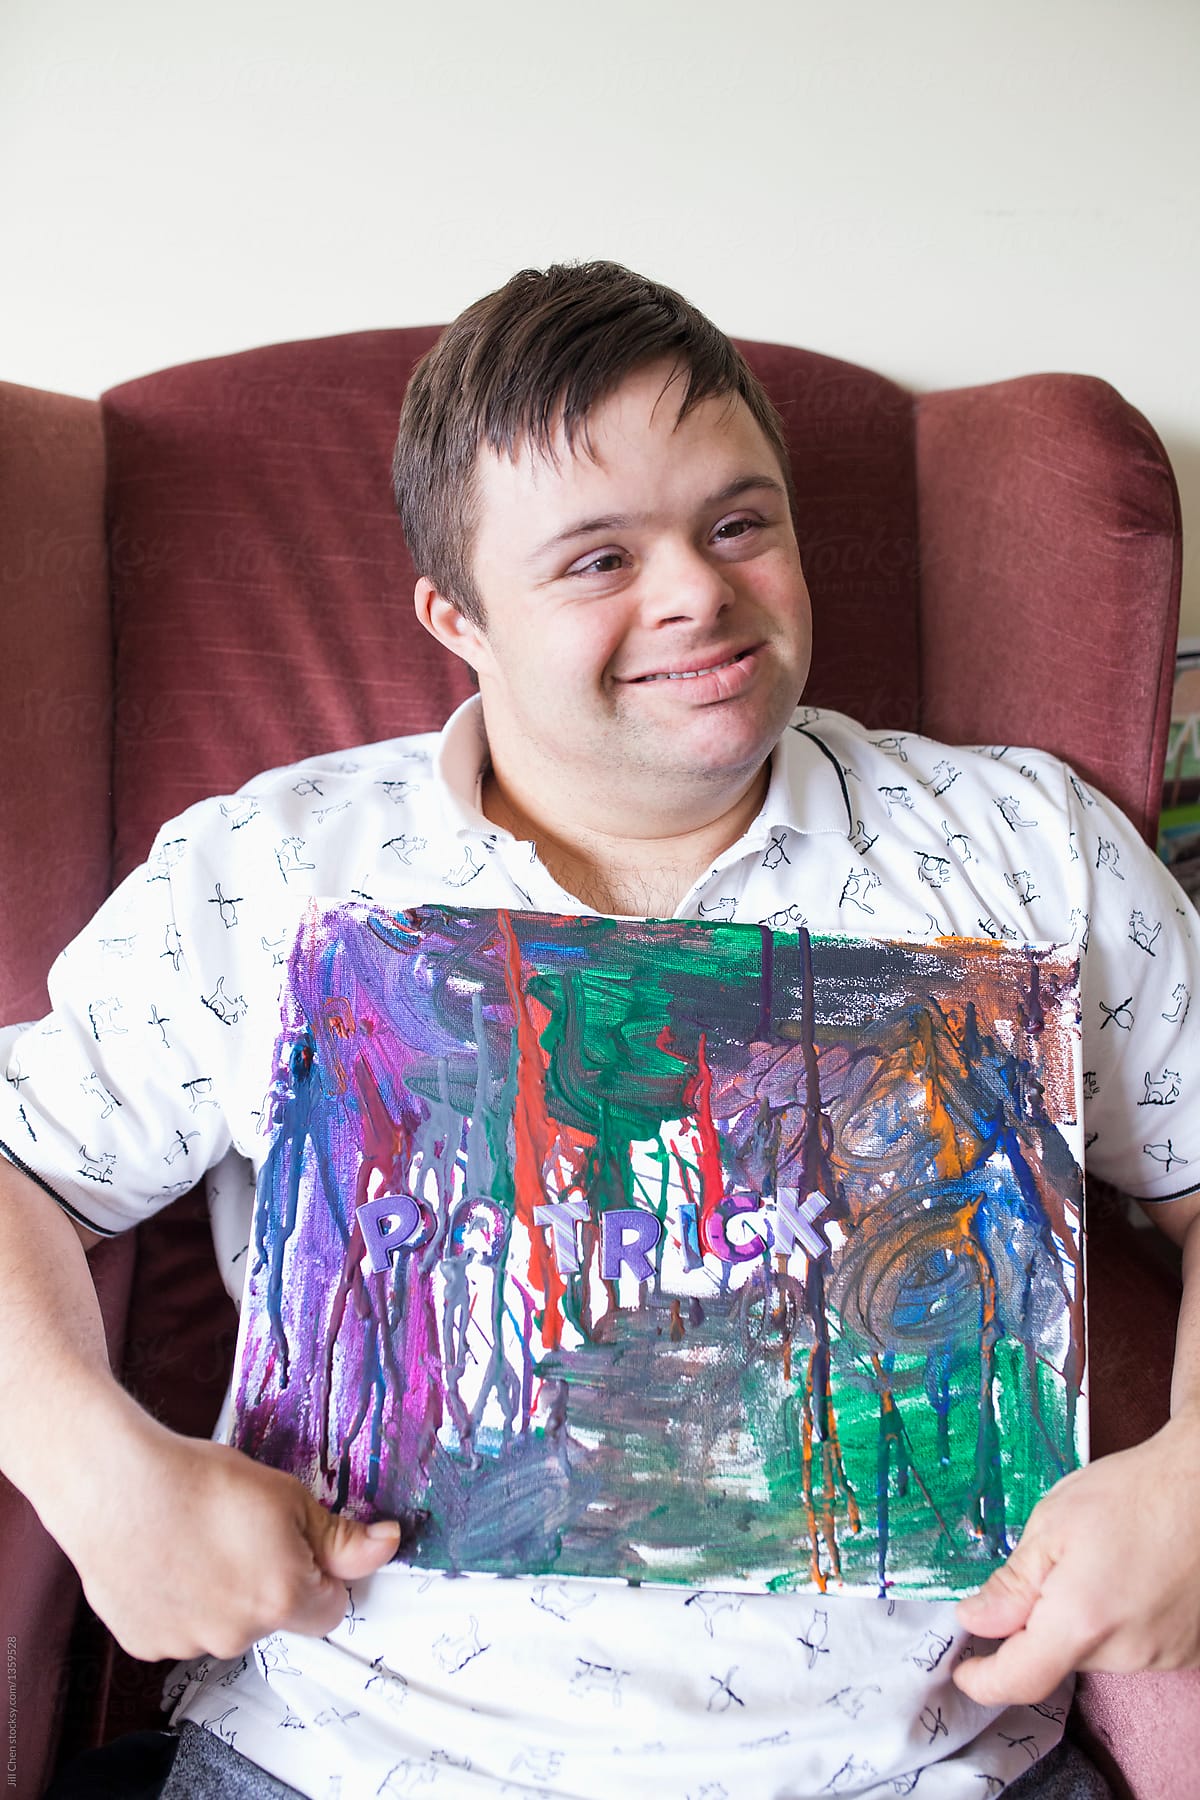 Man with special needs proudly shows off his painting.